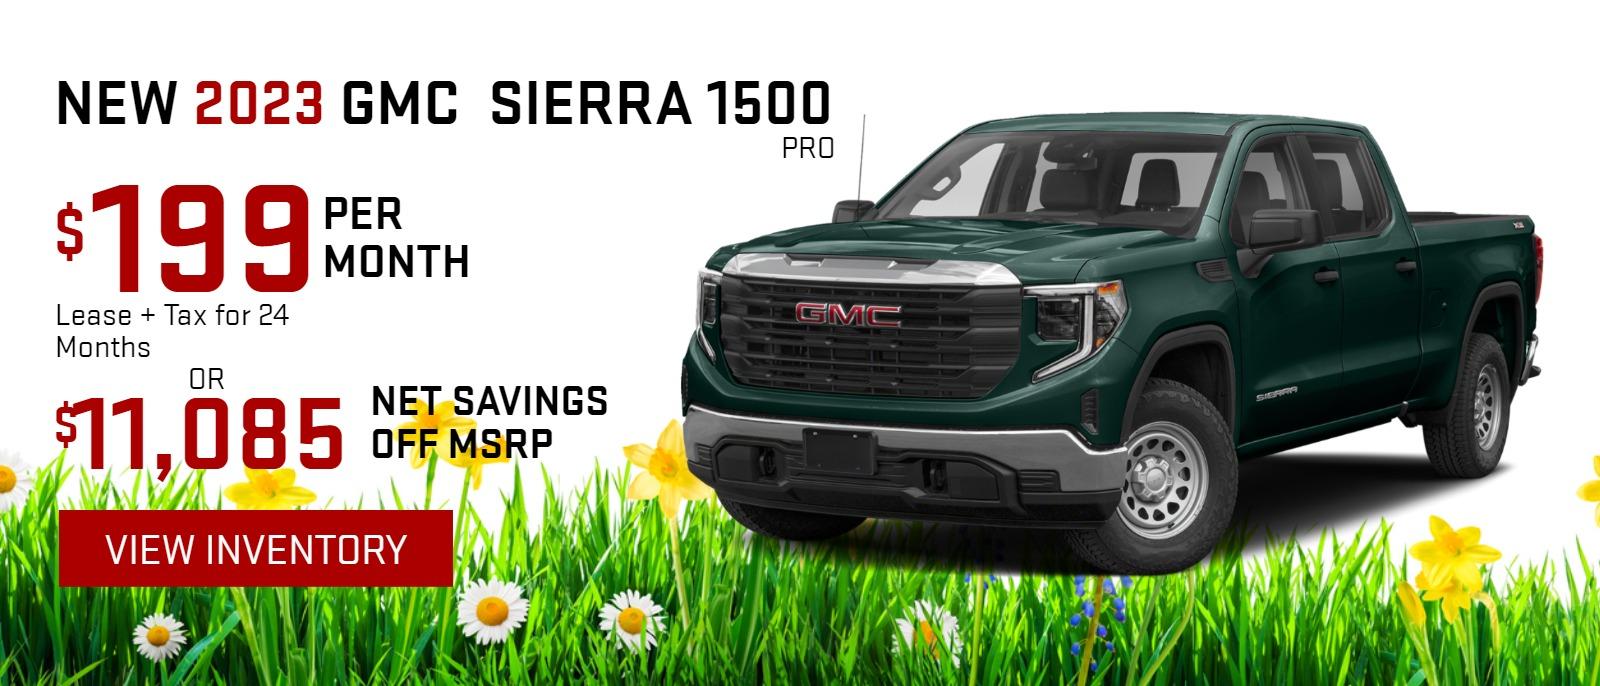 New 2023 GMC Sierra 1500 Pro
$199/mo. Lease + Tax for 24 Months
OR
$11,085 Net Savings off MSRP